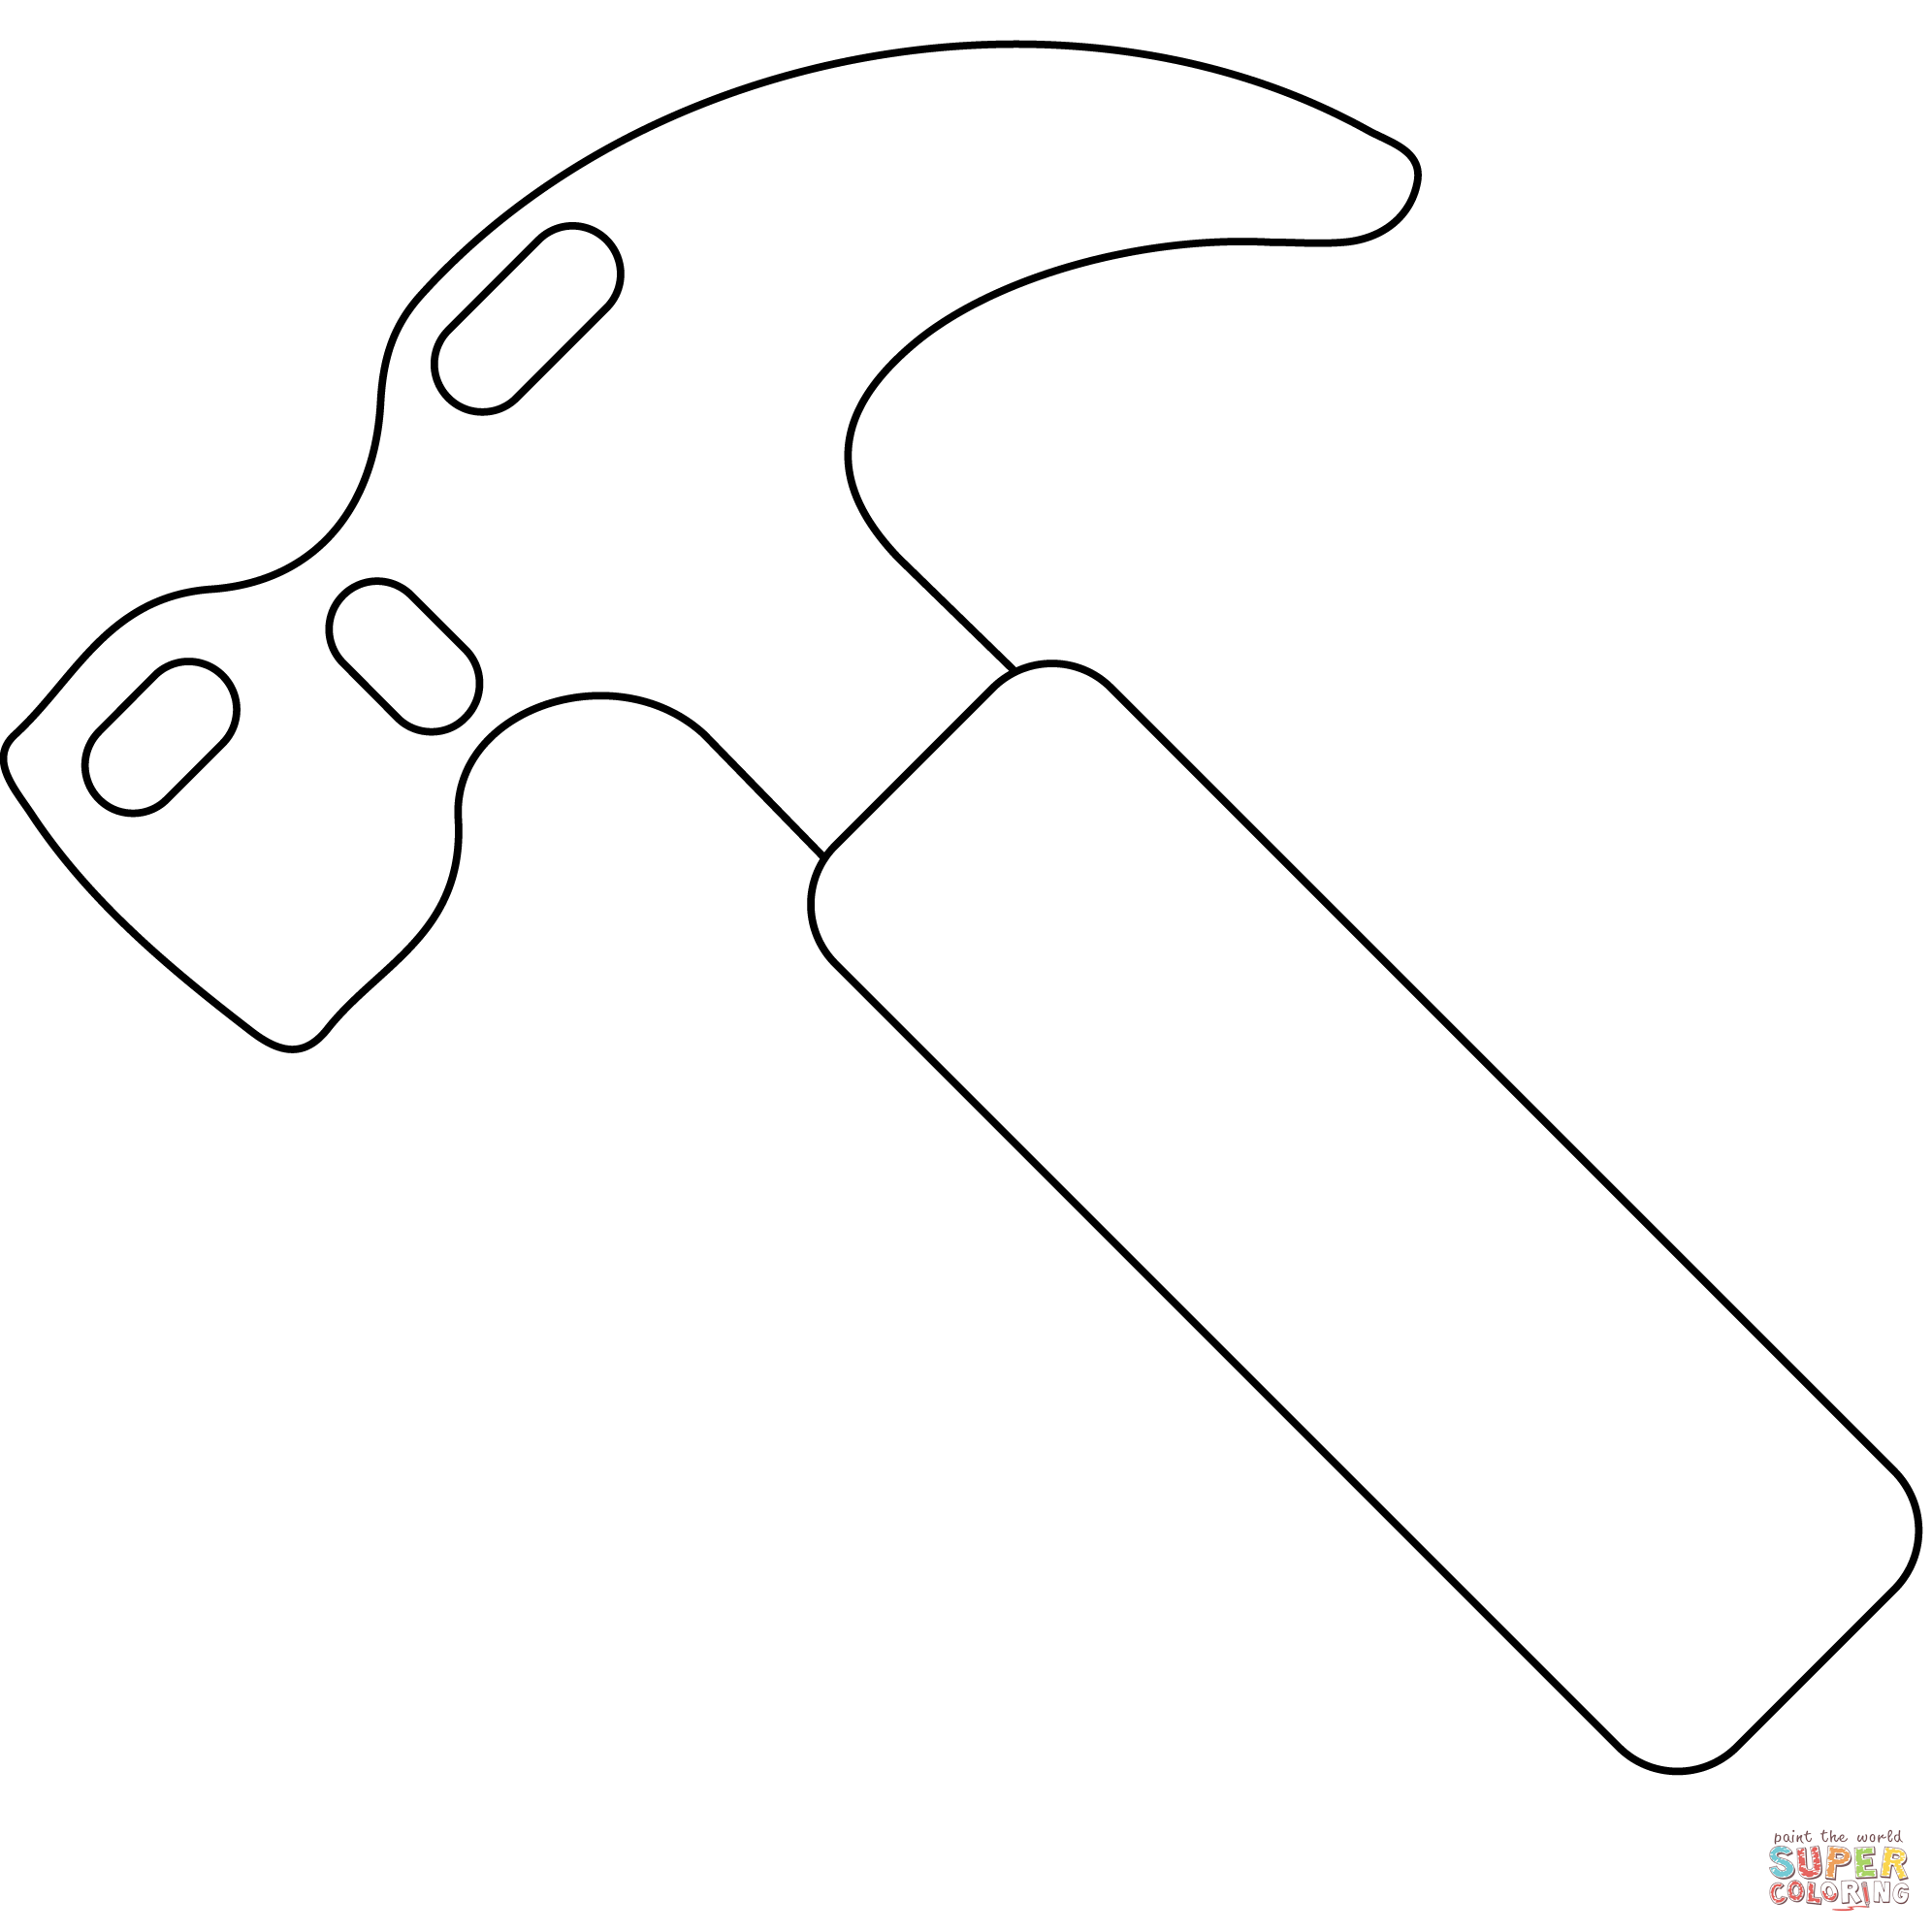 Hammer emoji coloring page free printable coloring pages